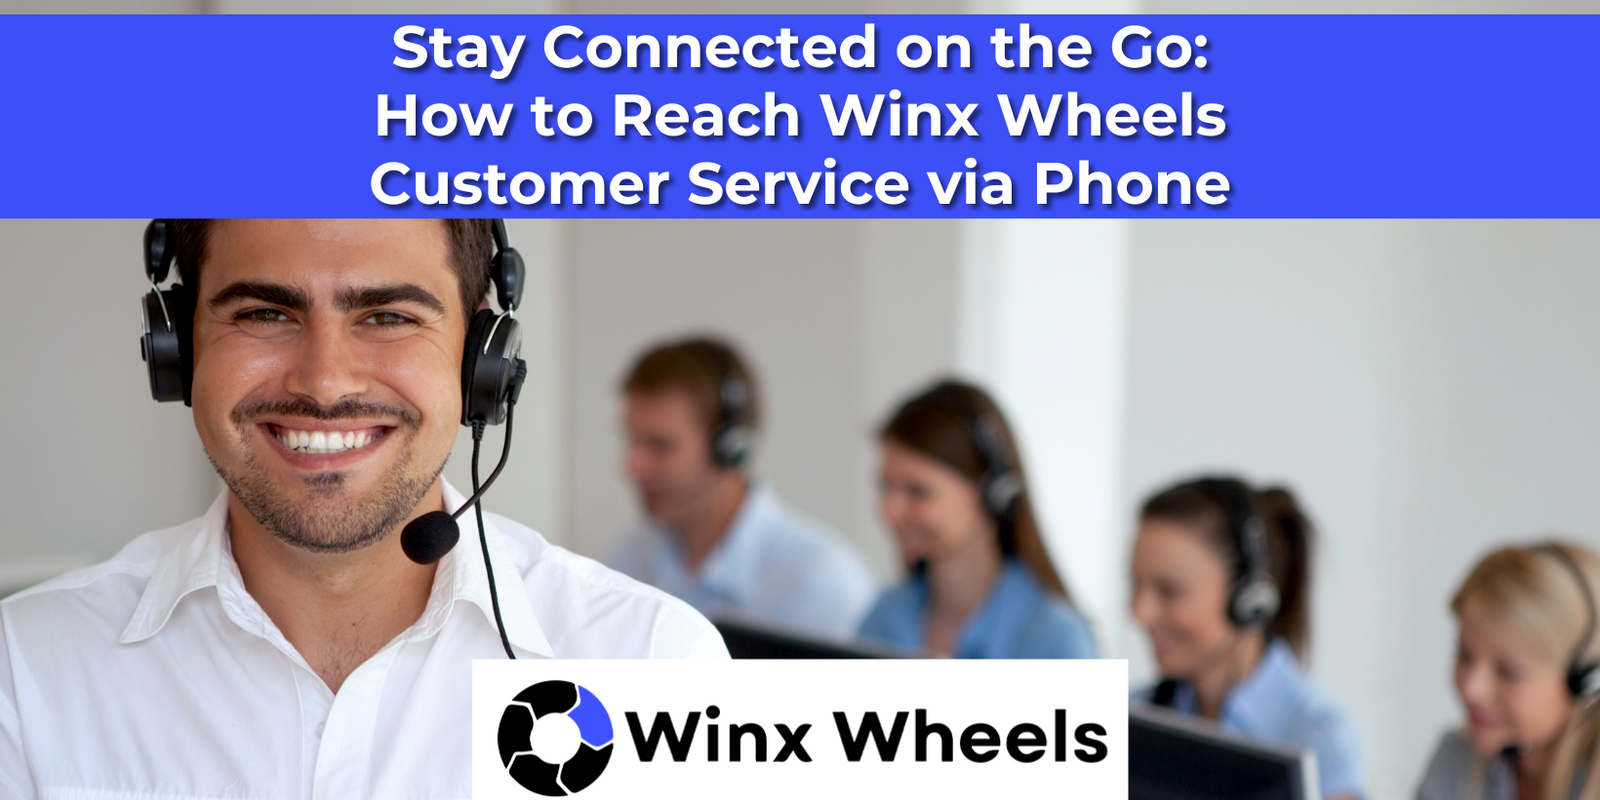 Stay Connected on the Go: How to Reach Winx Wheels Customer Service via Phone